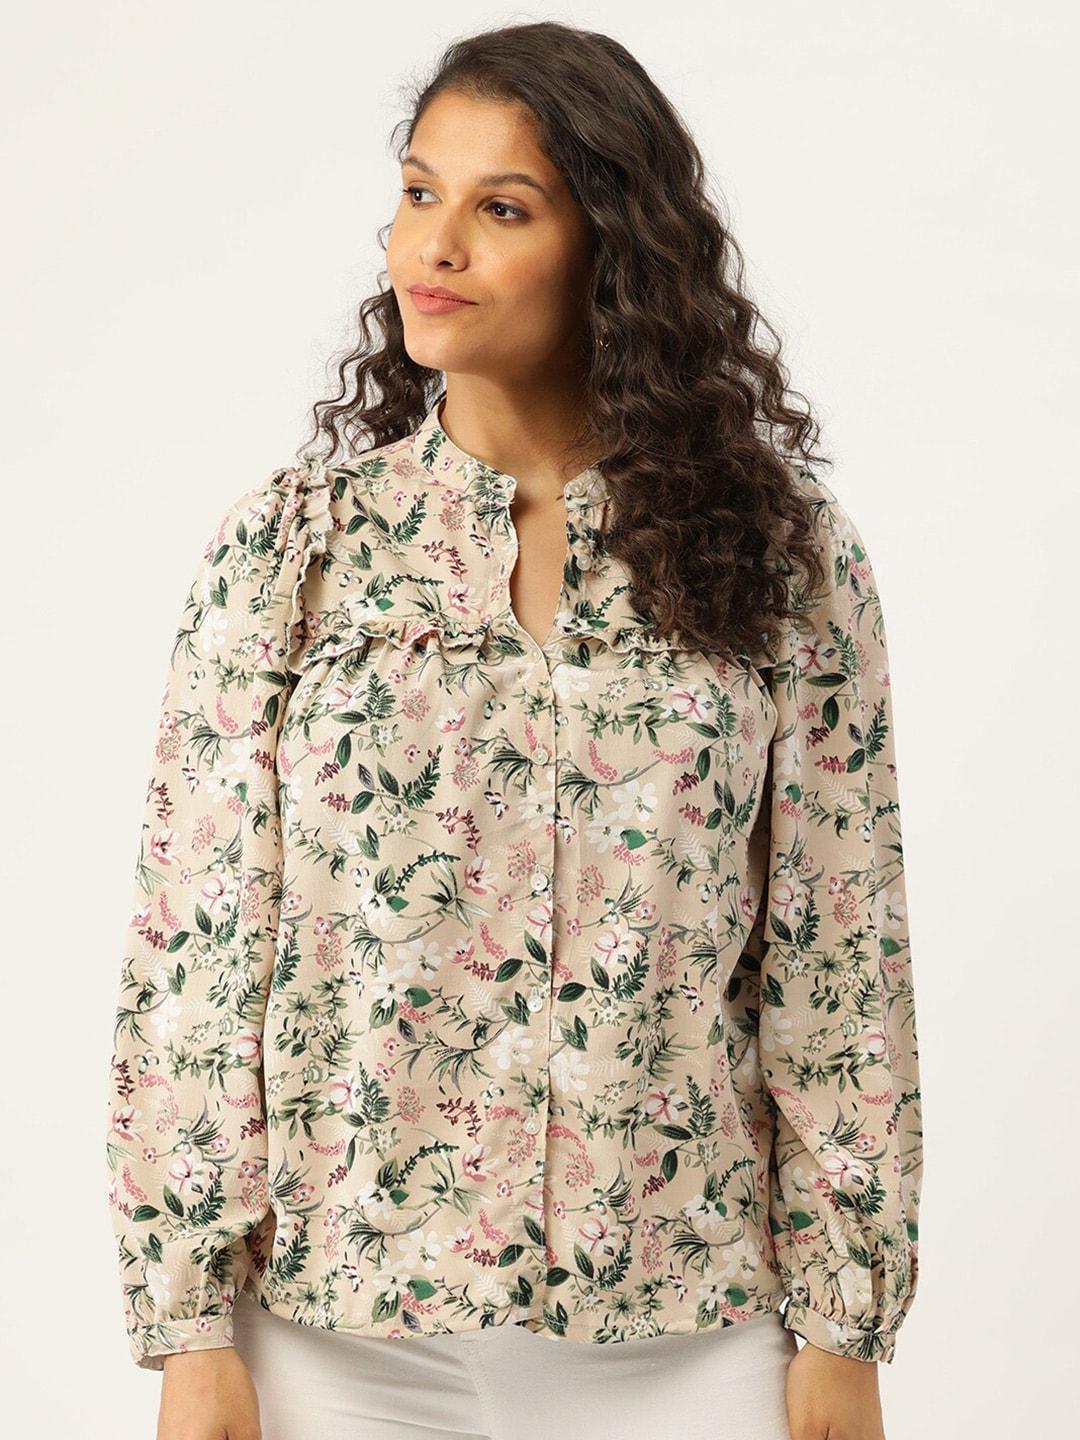 baesd-floral-printed-shirt-style-crepe-top